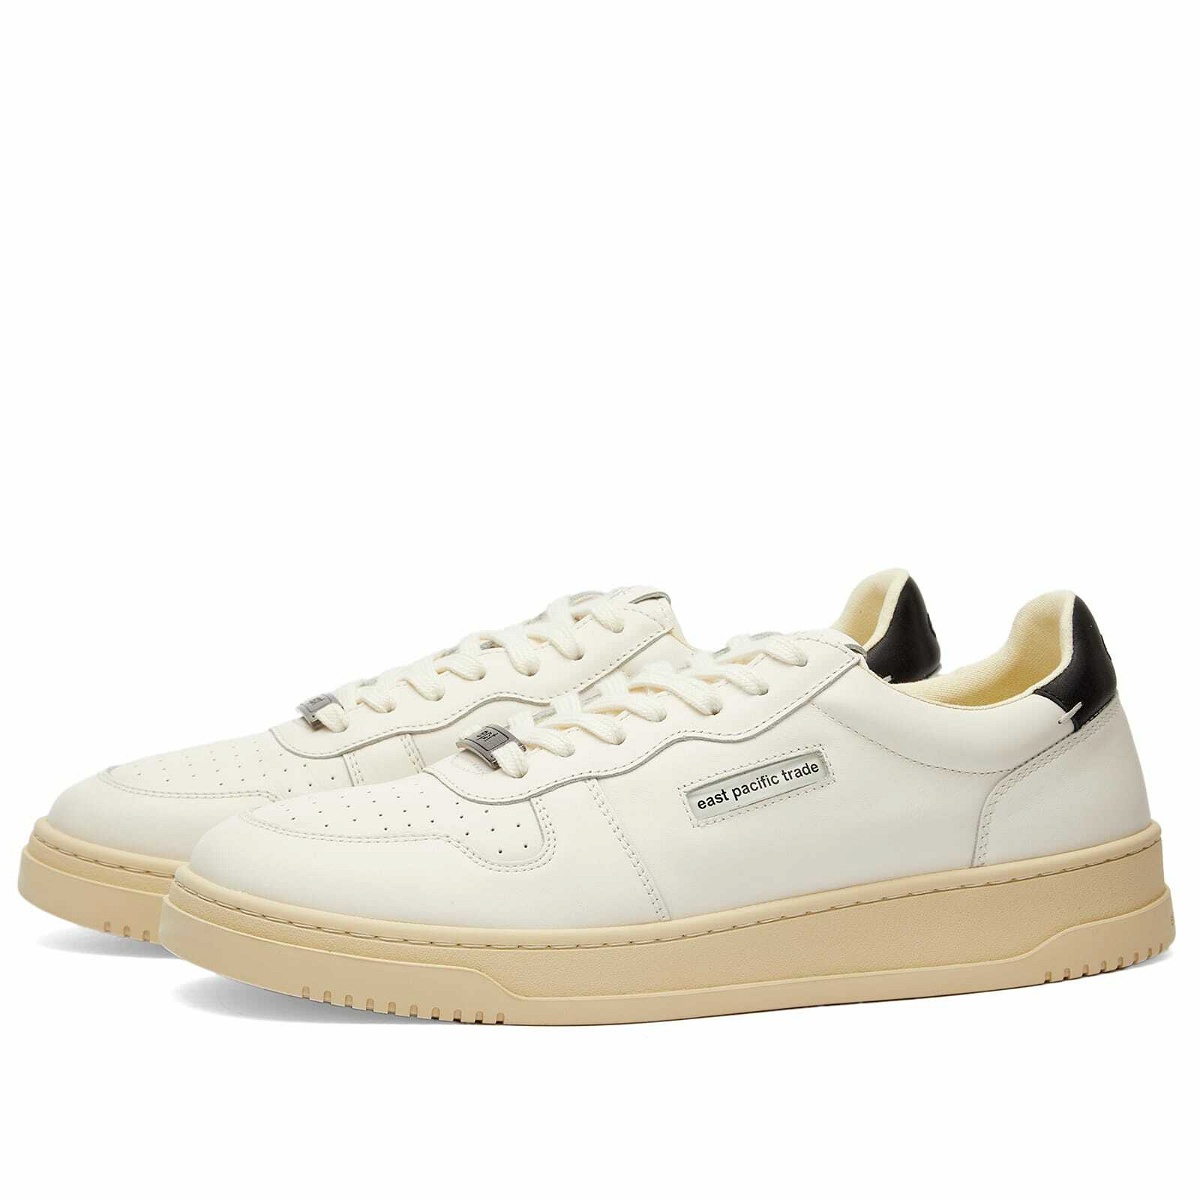 Photo: East Pacific Trade Men's Dive Court Sneakers in Off White/Black